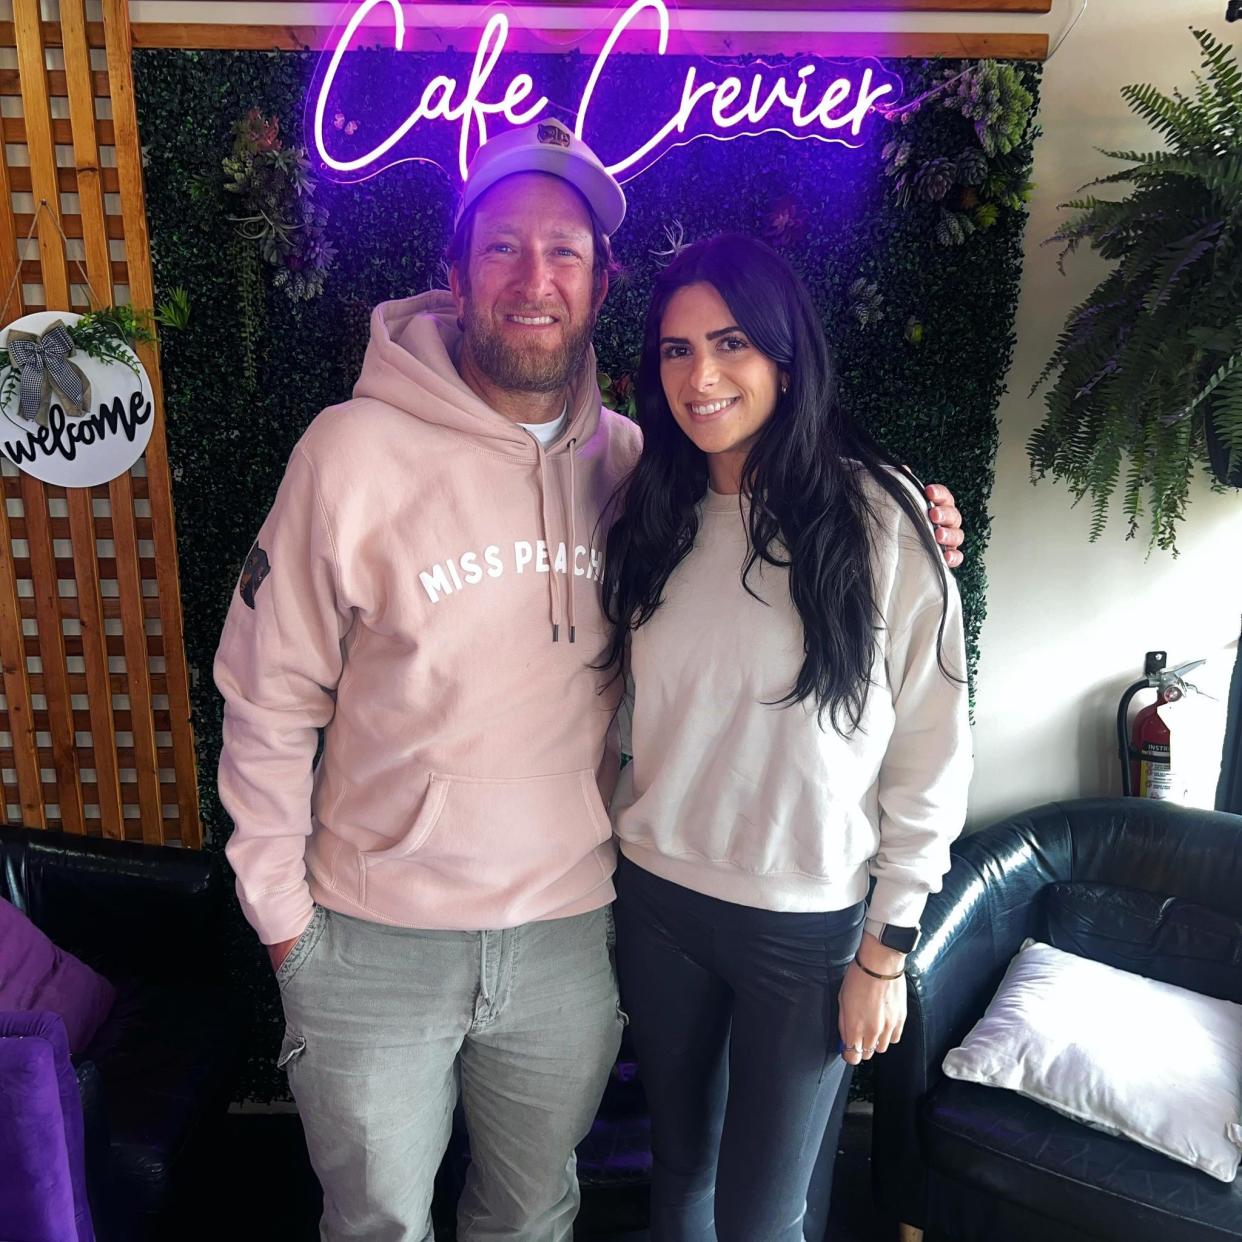 Dave Portnoy from One Bite Pizza Reviews with Cafe Crevier Owner Brittany Crevier during his recent vist.